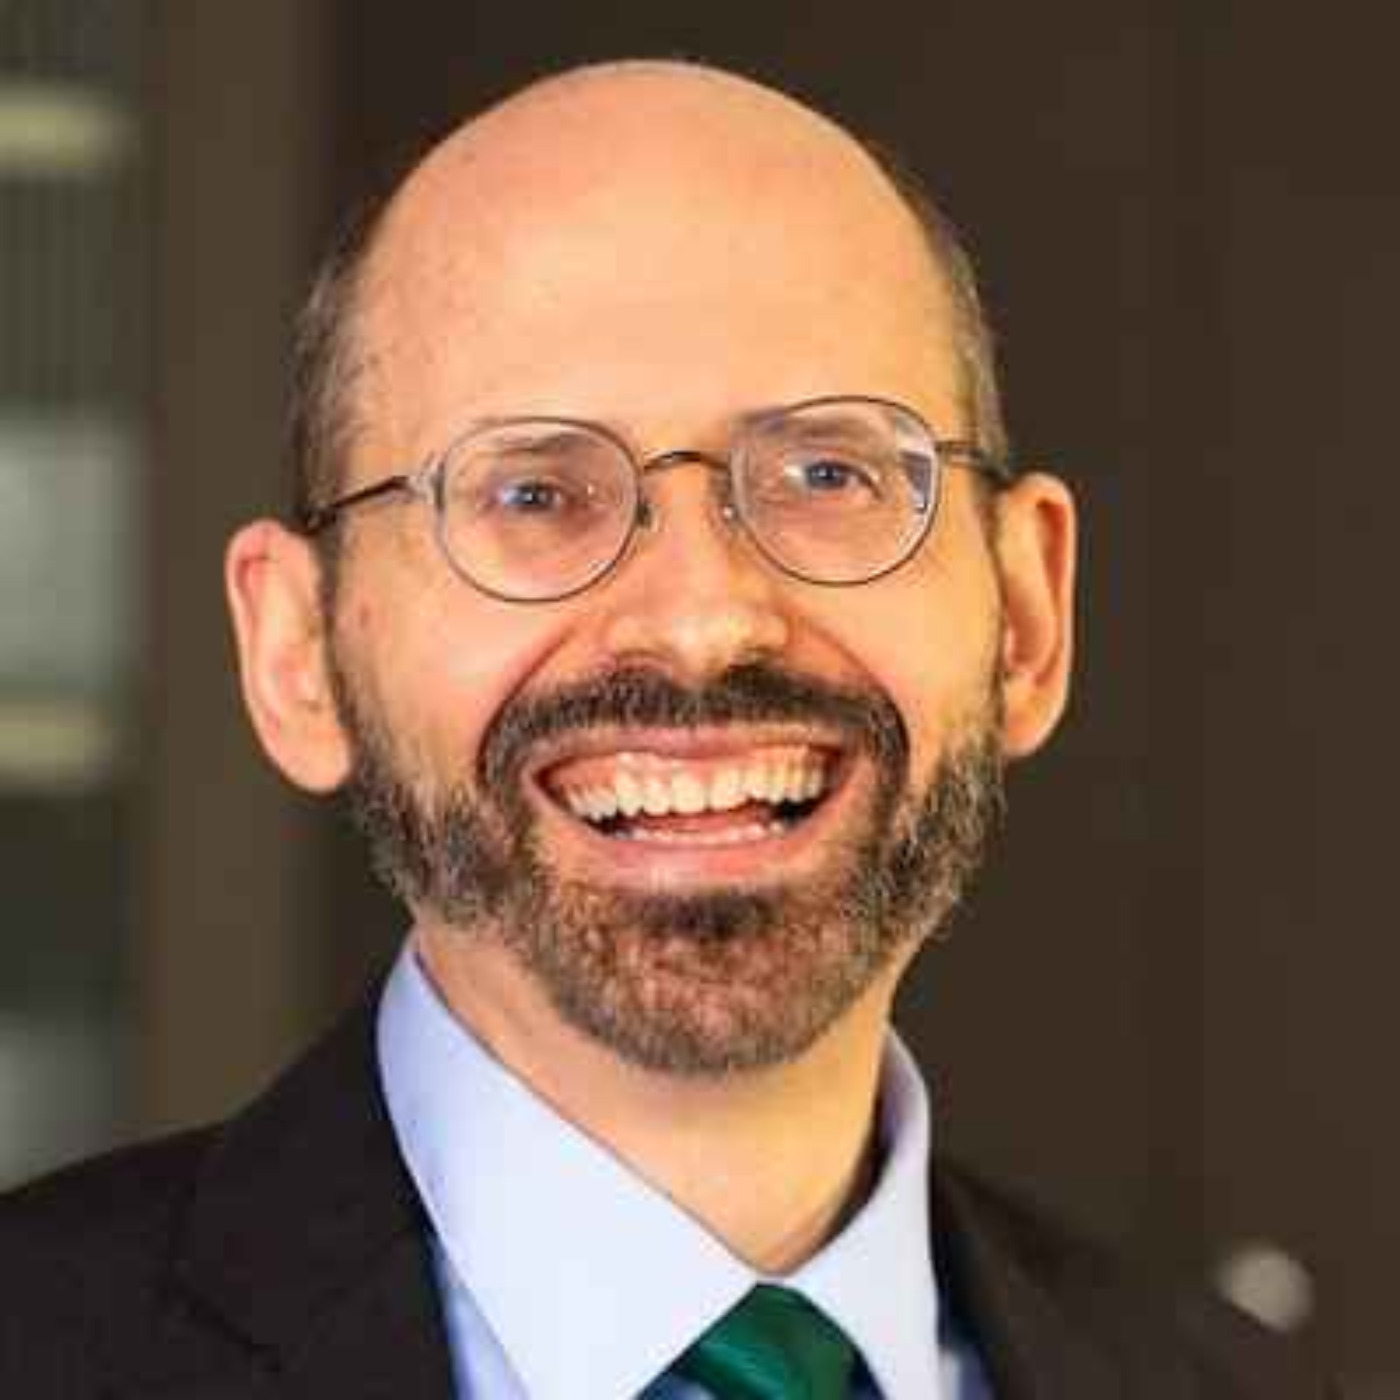 724: Dr. Michael Greger, part 2: How Not to Age